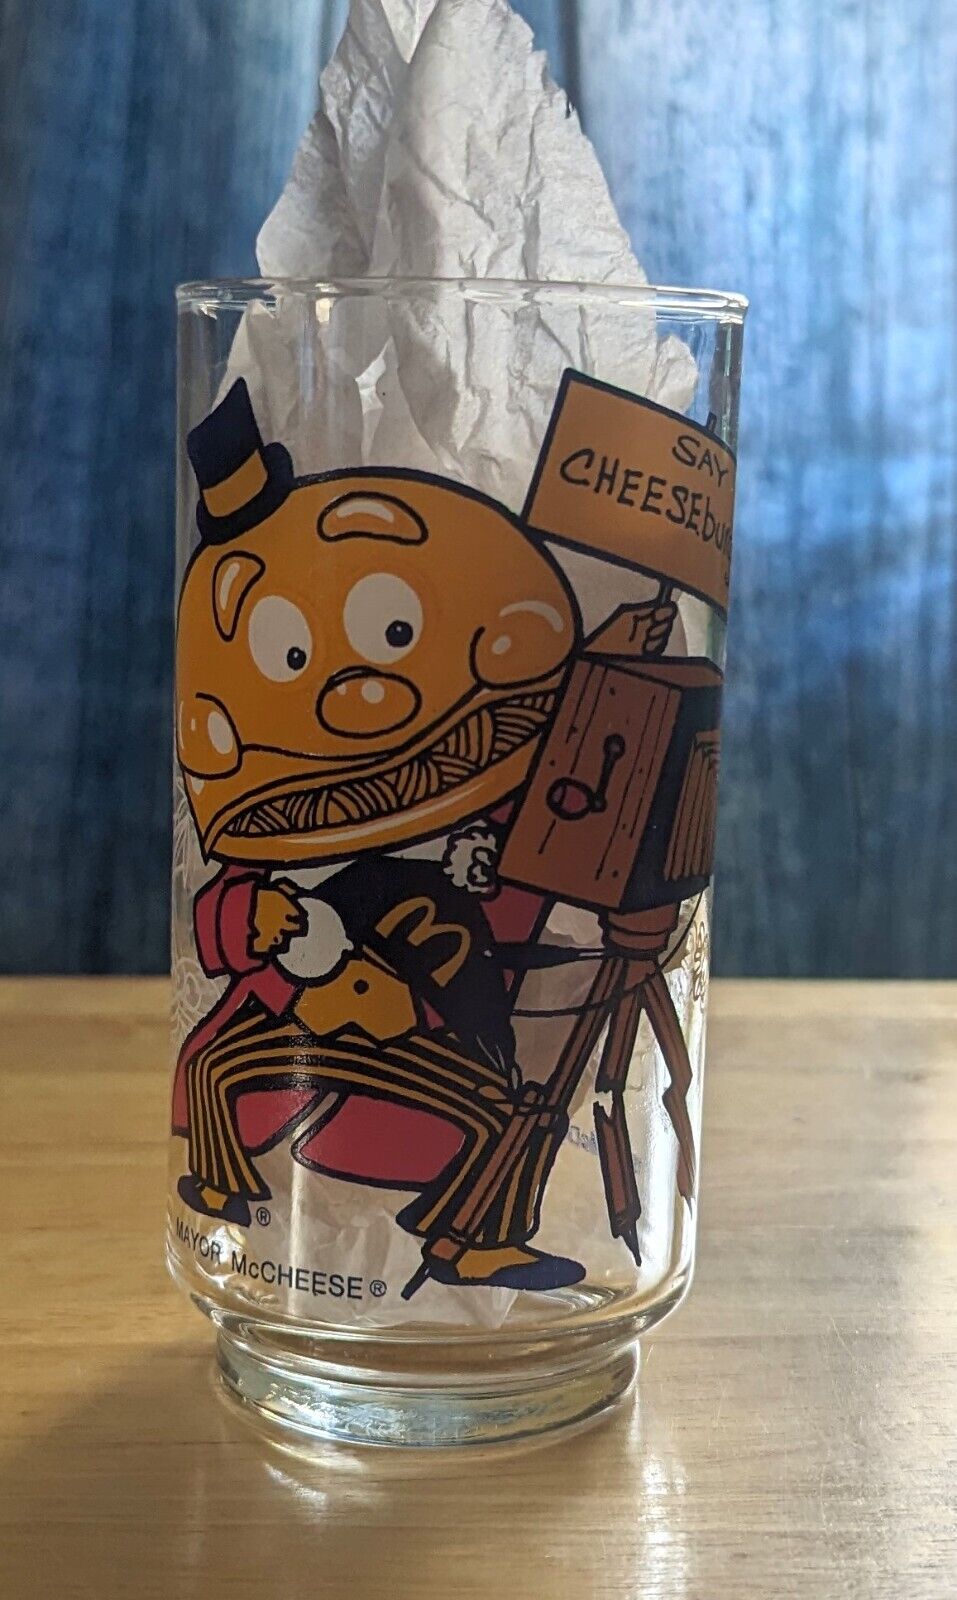 1977 McDonald's glasses Mayor McCheese or Grimace. DISCOUNTS on multiple